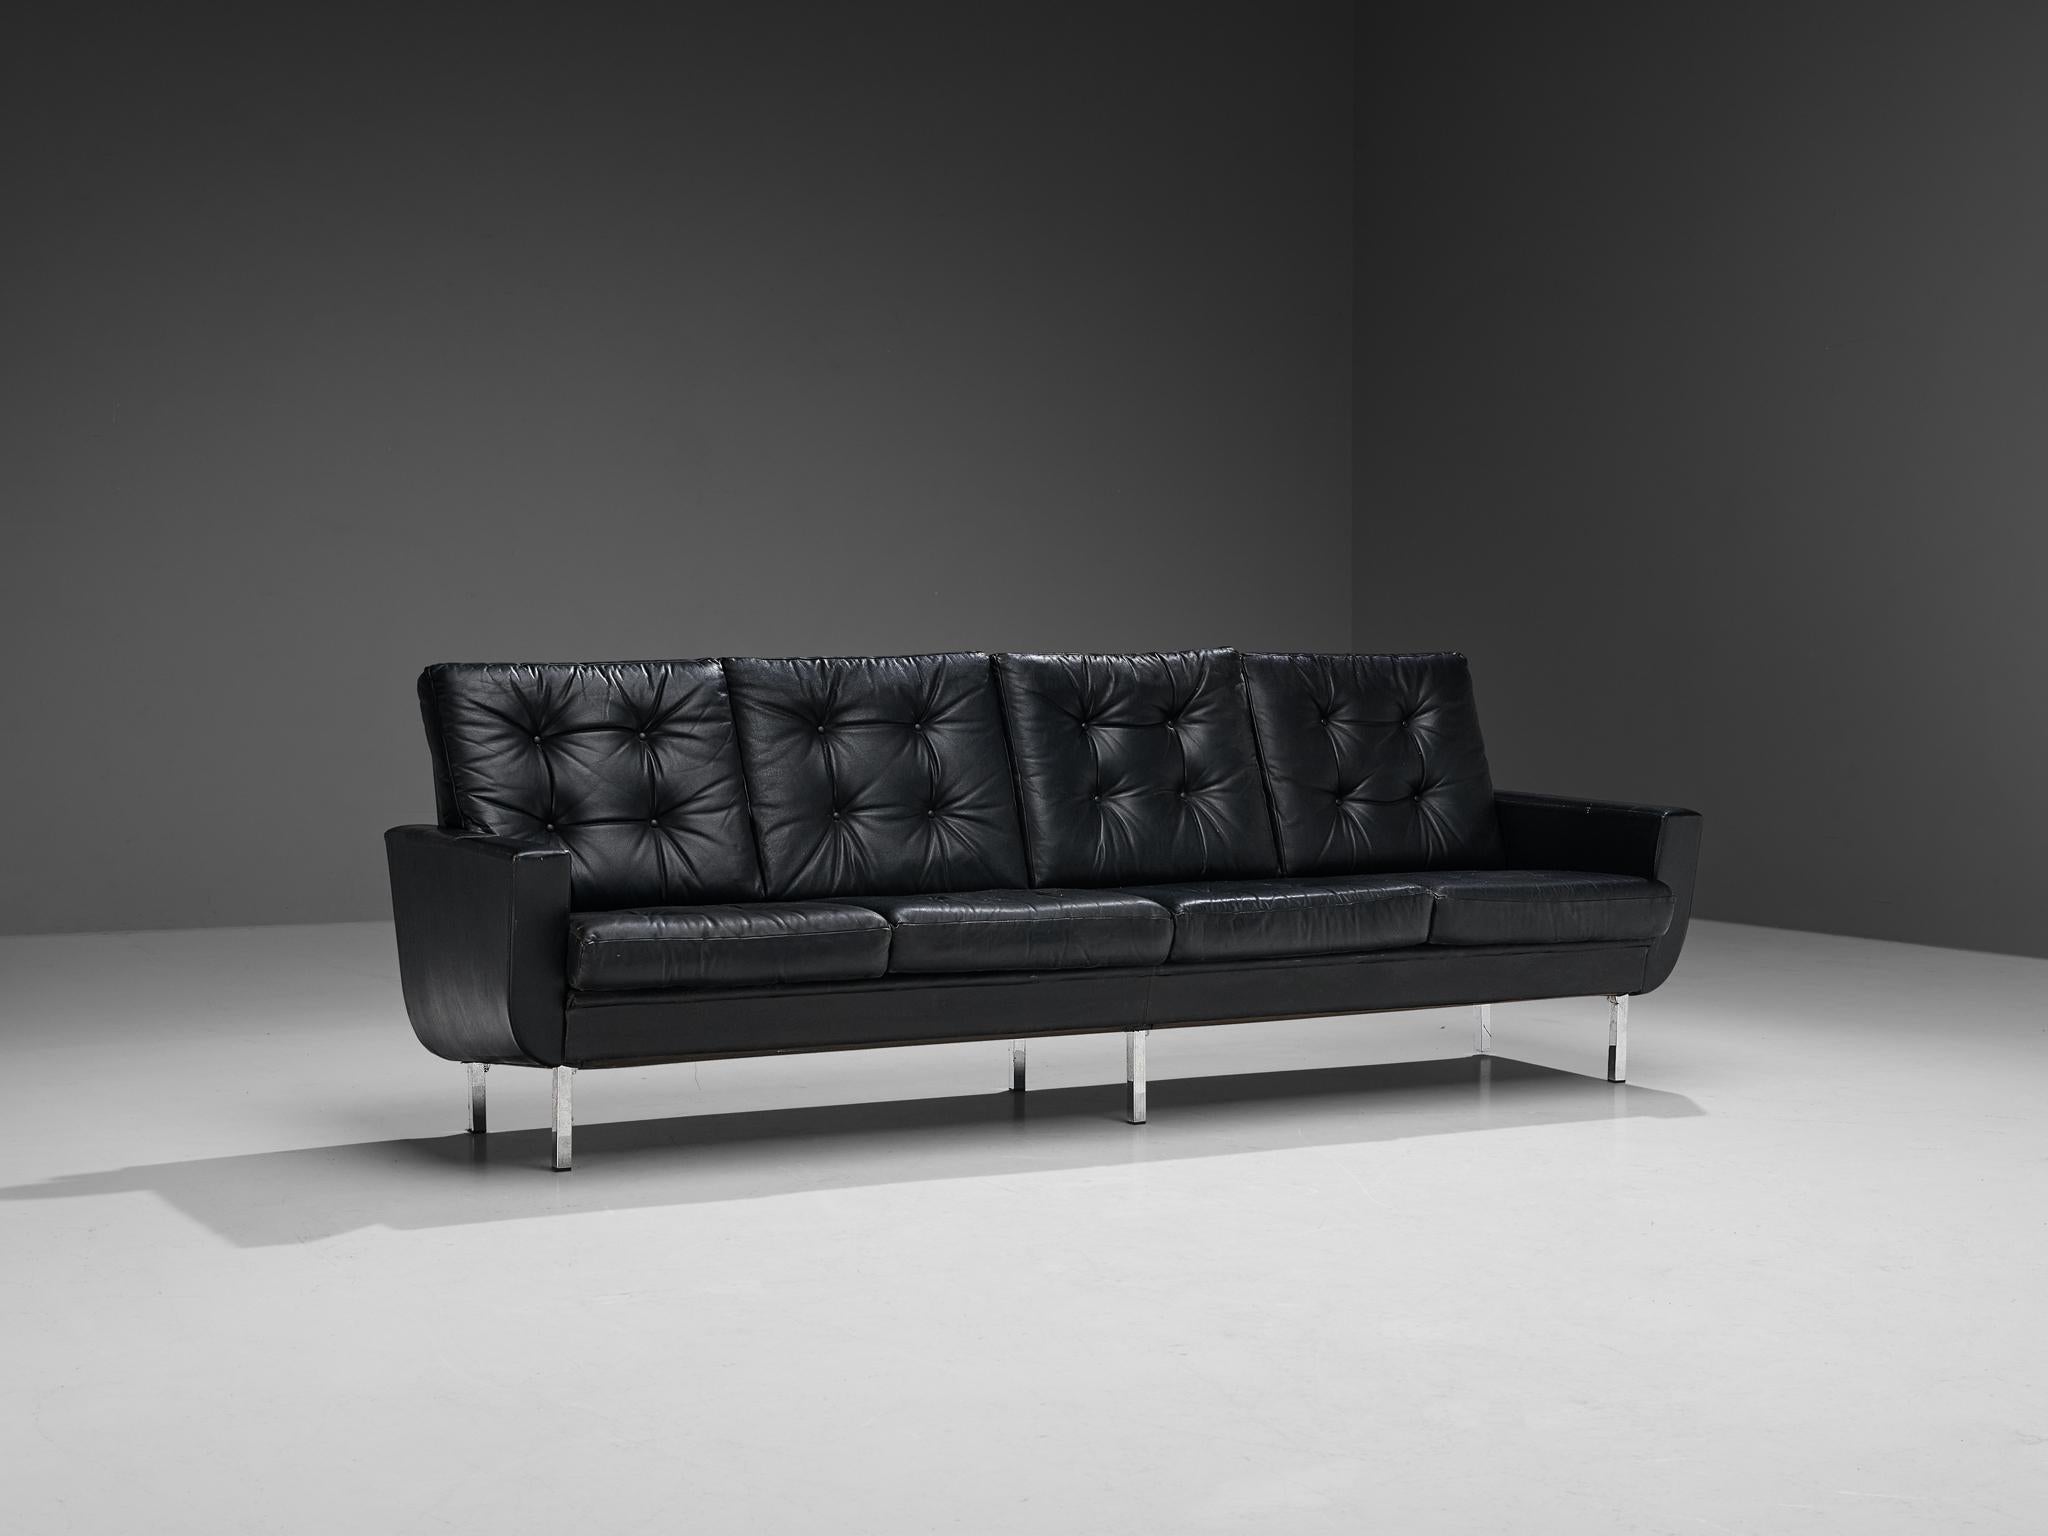 Four-seater sofa, leatherette, steel, Europe, 1960s. 

Sizeable sofa that could easily seat four or more people. This sofa is simplistic, yet stylish in its design. Due to the overall black color of the leatherette upholstery, the sofa radiates